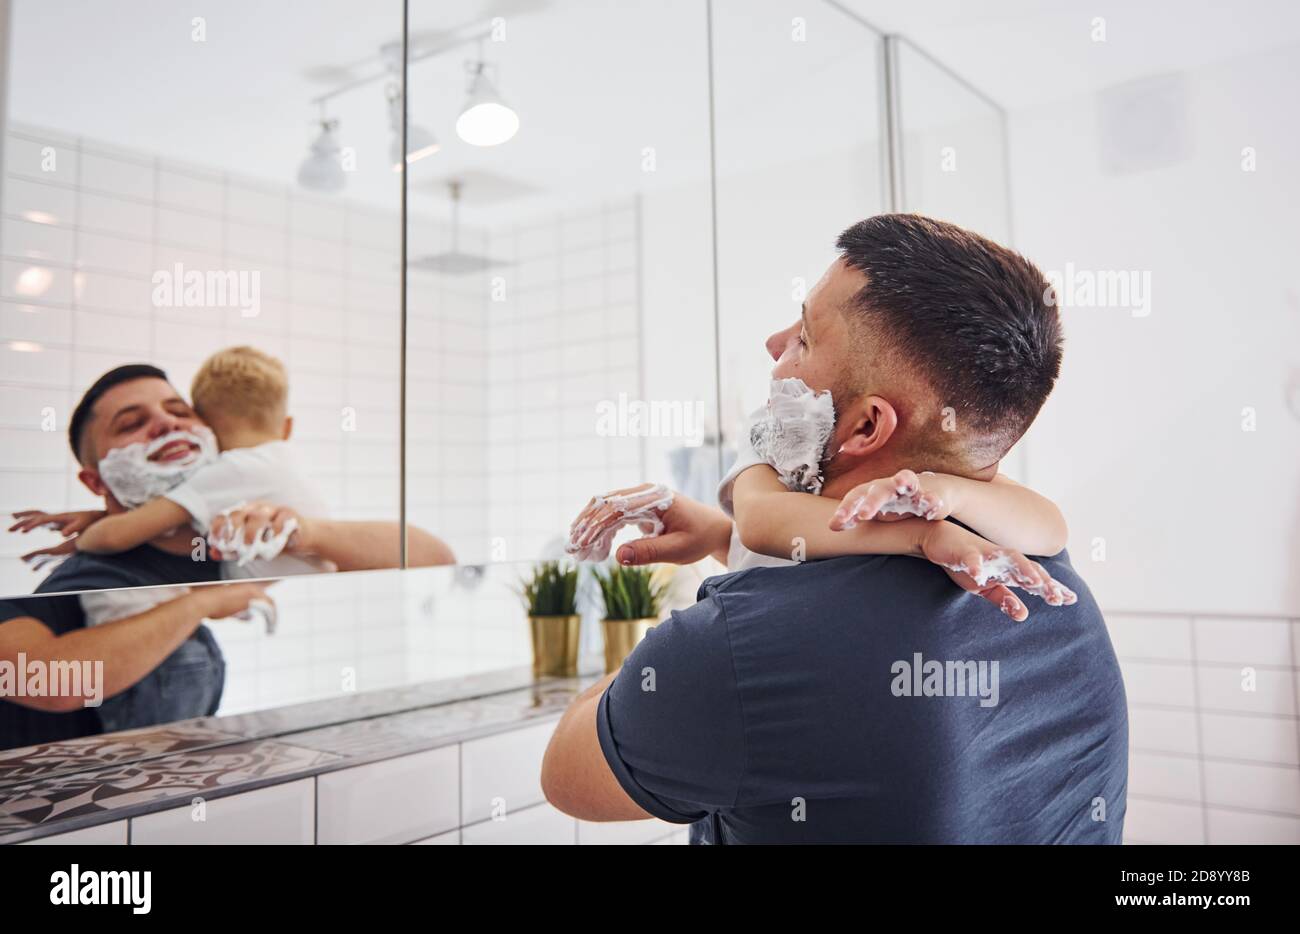 Father with his son is in the bathroom have fun by using shaving gel and looking in the mirror Stock Photo